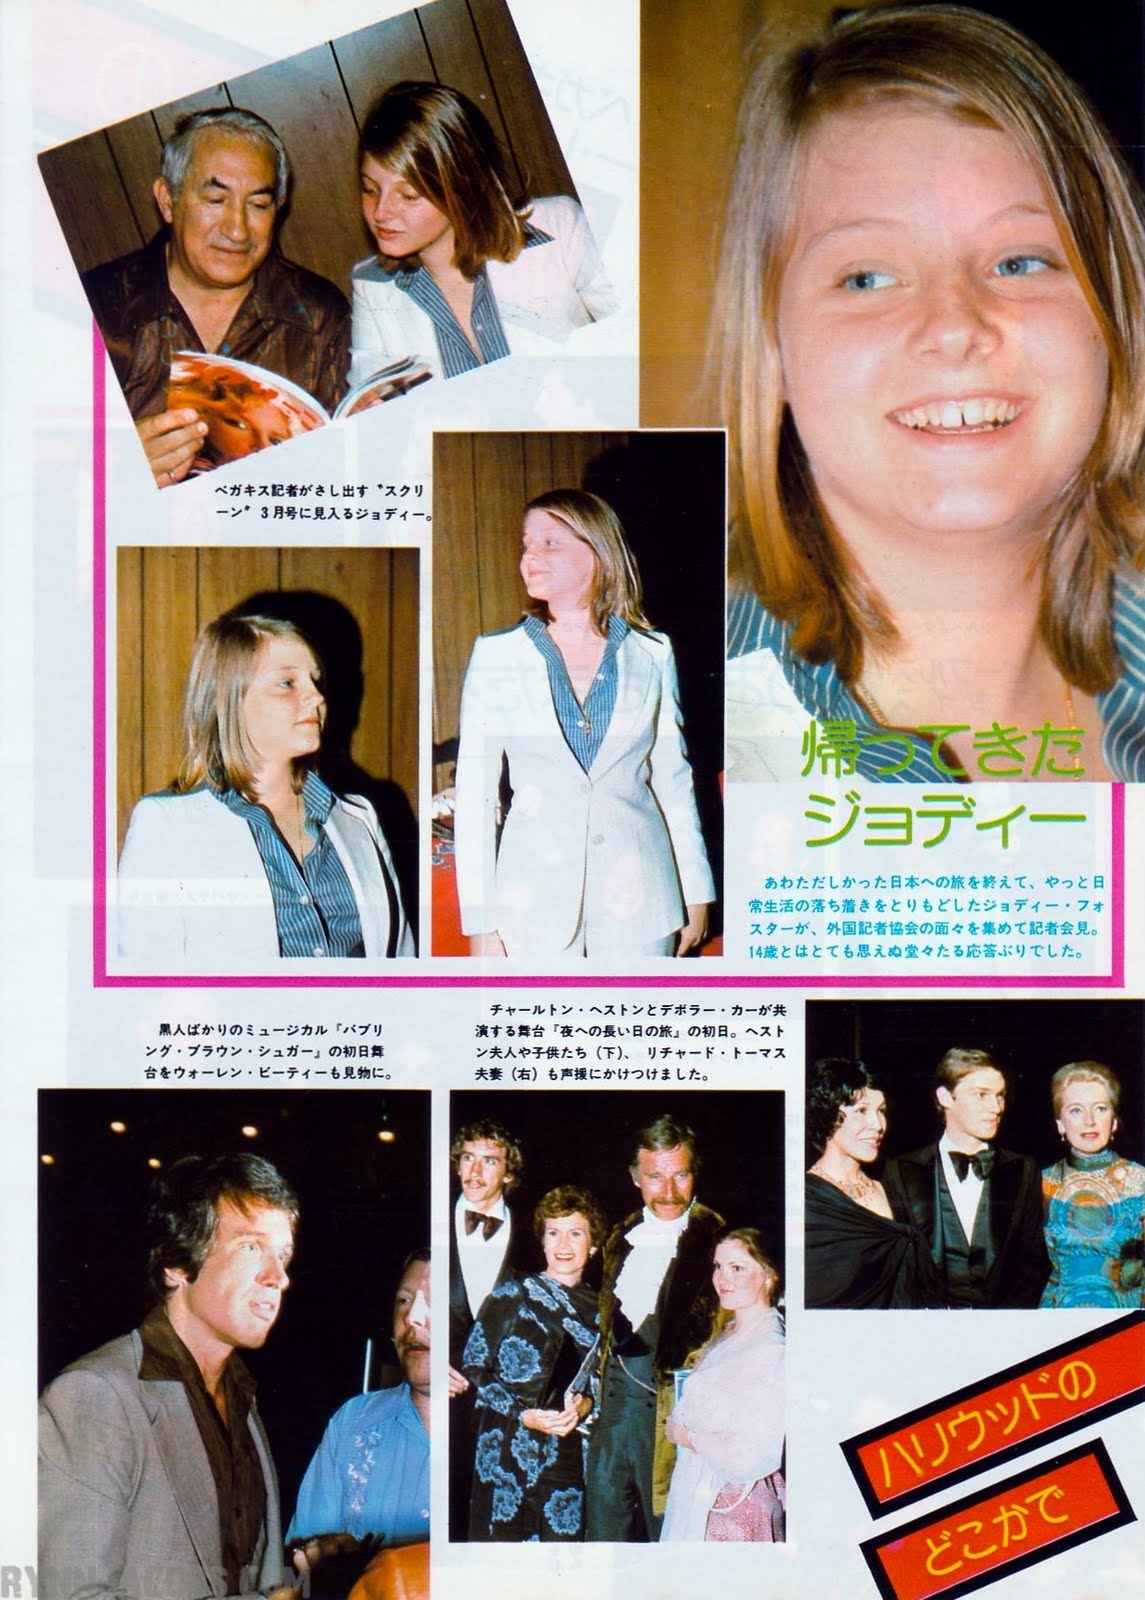 The Jodie Foster Museum Yet Unknown Event Japan [1977]